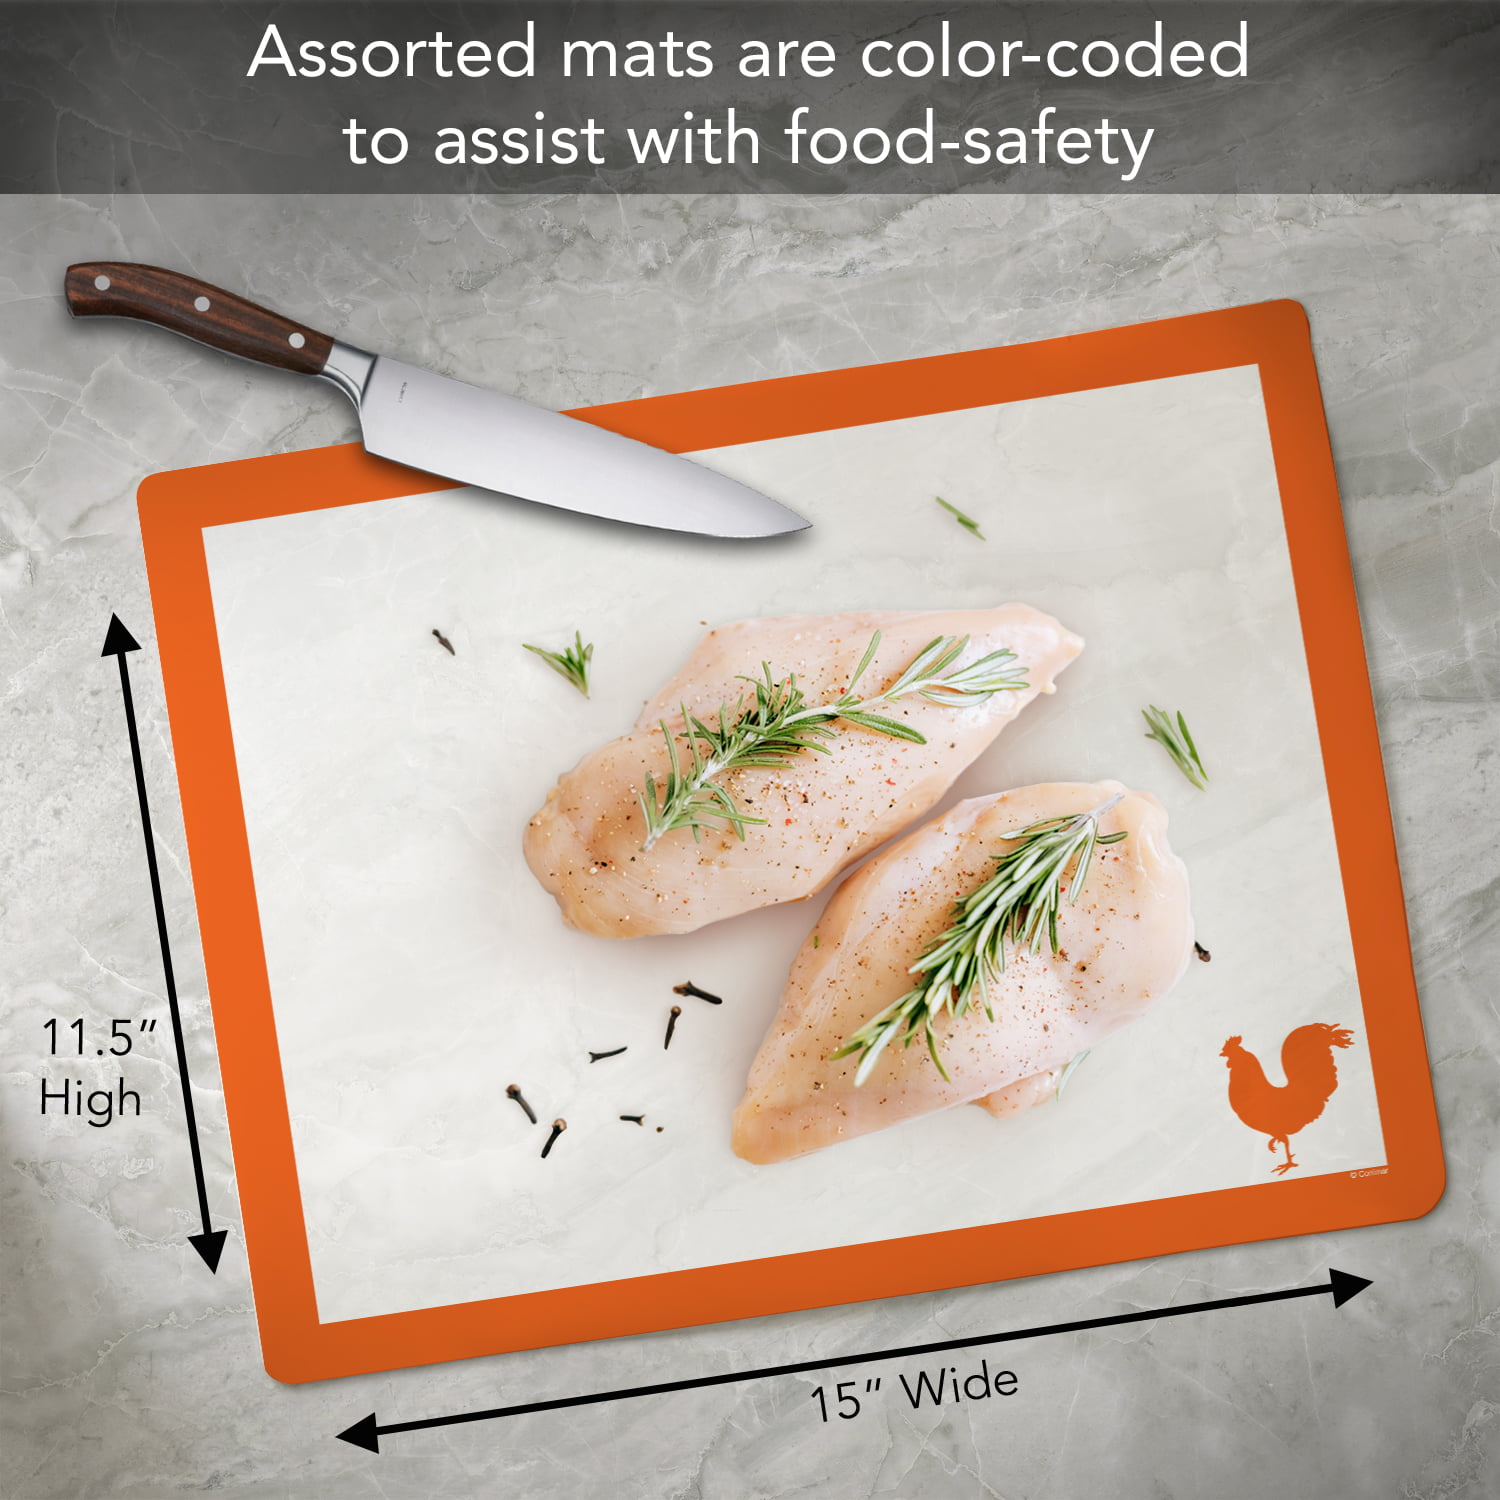 Plastic Cutting Boards for Kitchen, WK Flexible Cutting Board Mats Set of  4, Nonslip Cutting Board for Meat, Thin Cutting Sheets with Hole,  Dishwasher Safe, BPA Free - Yahoo Shopping